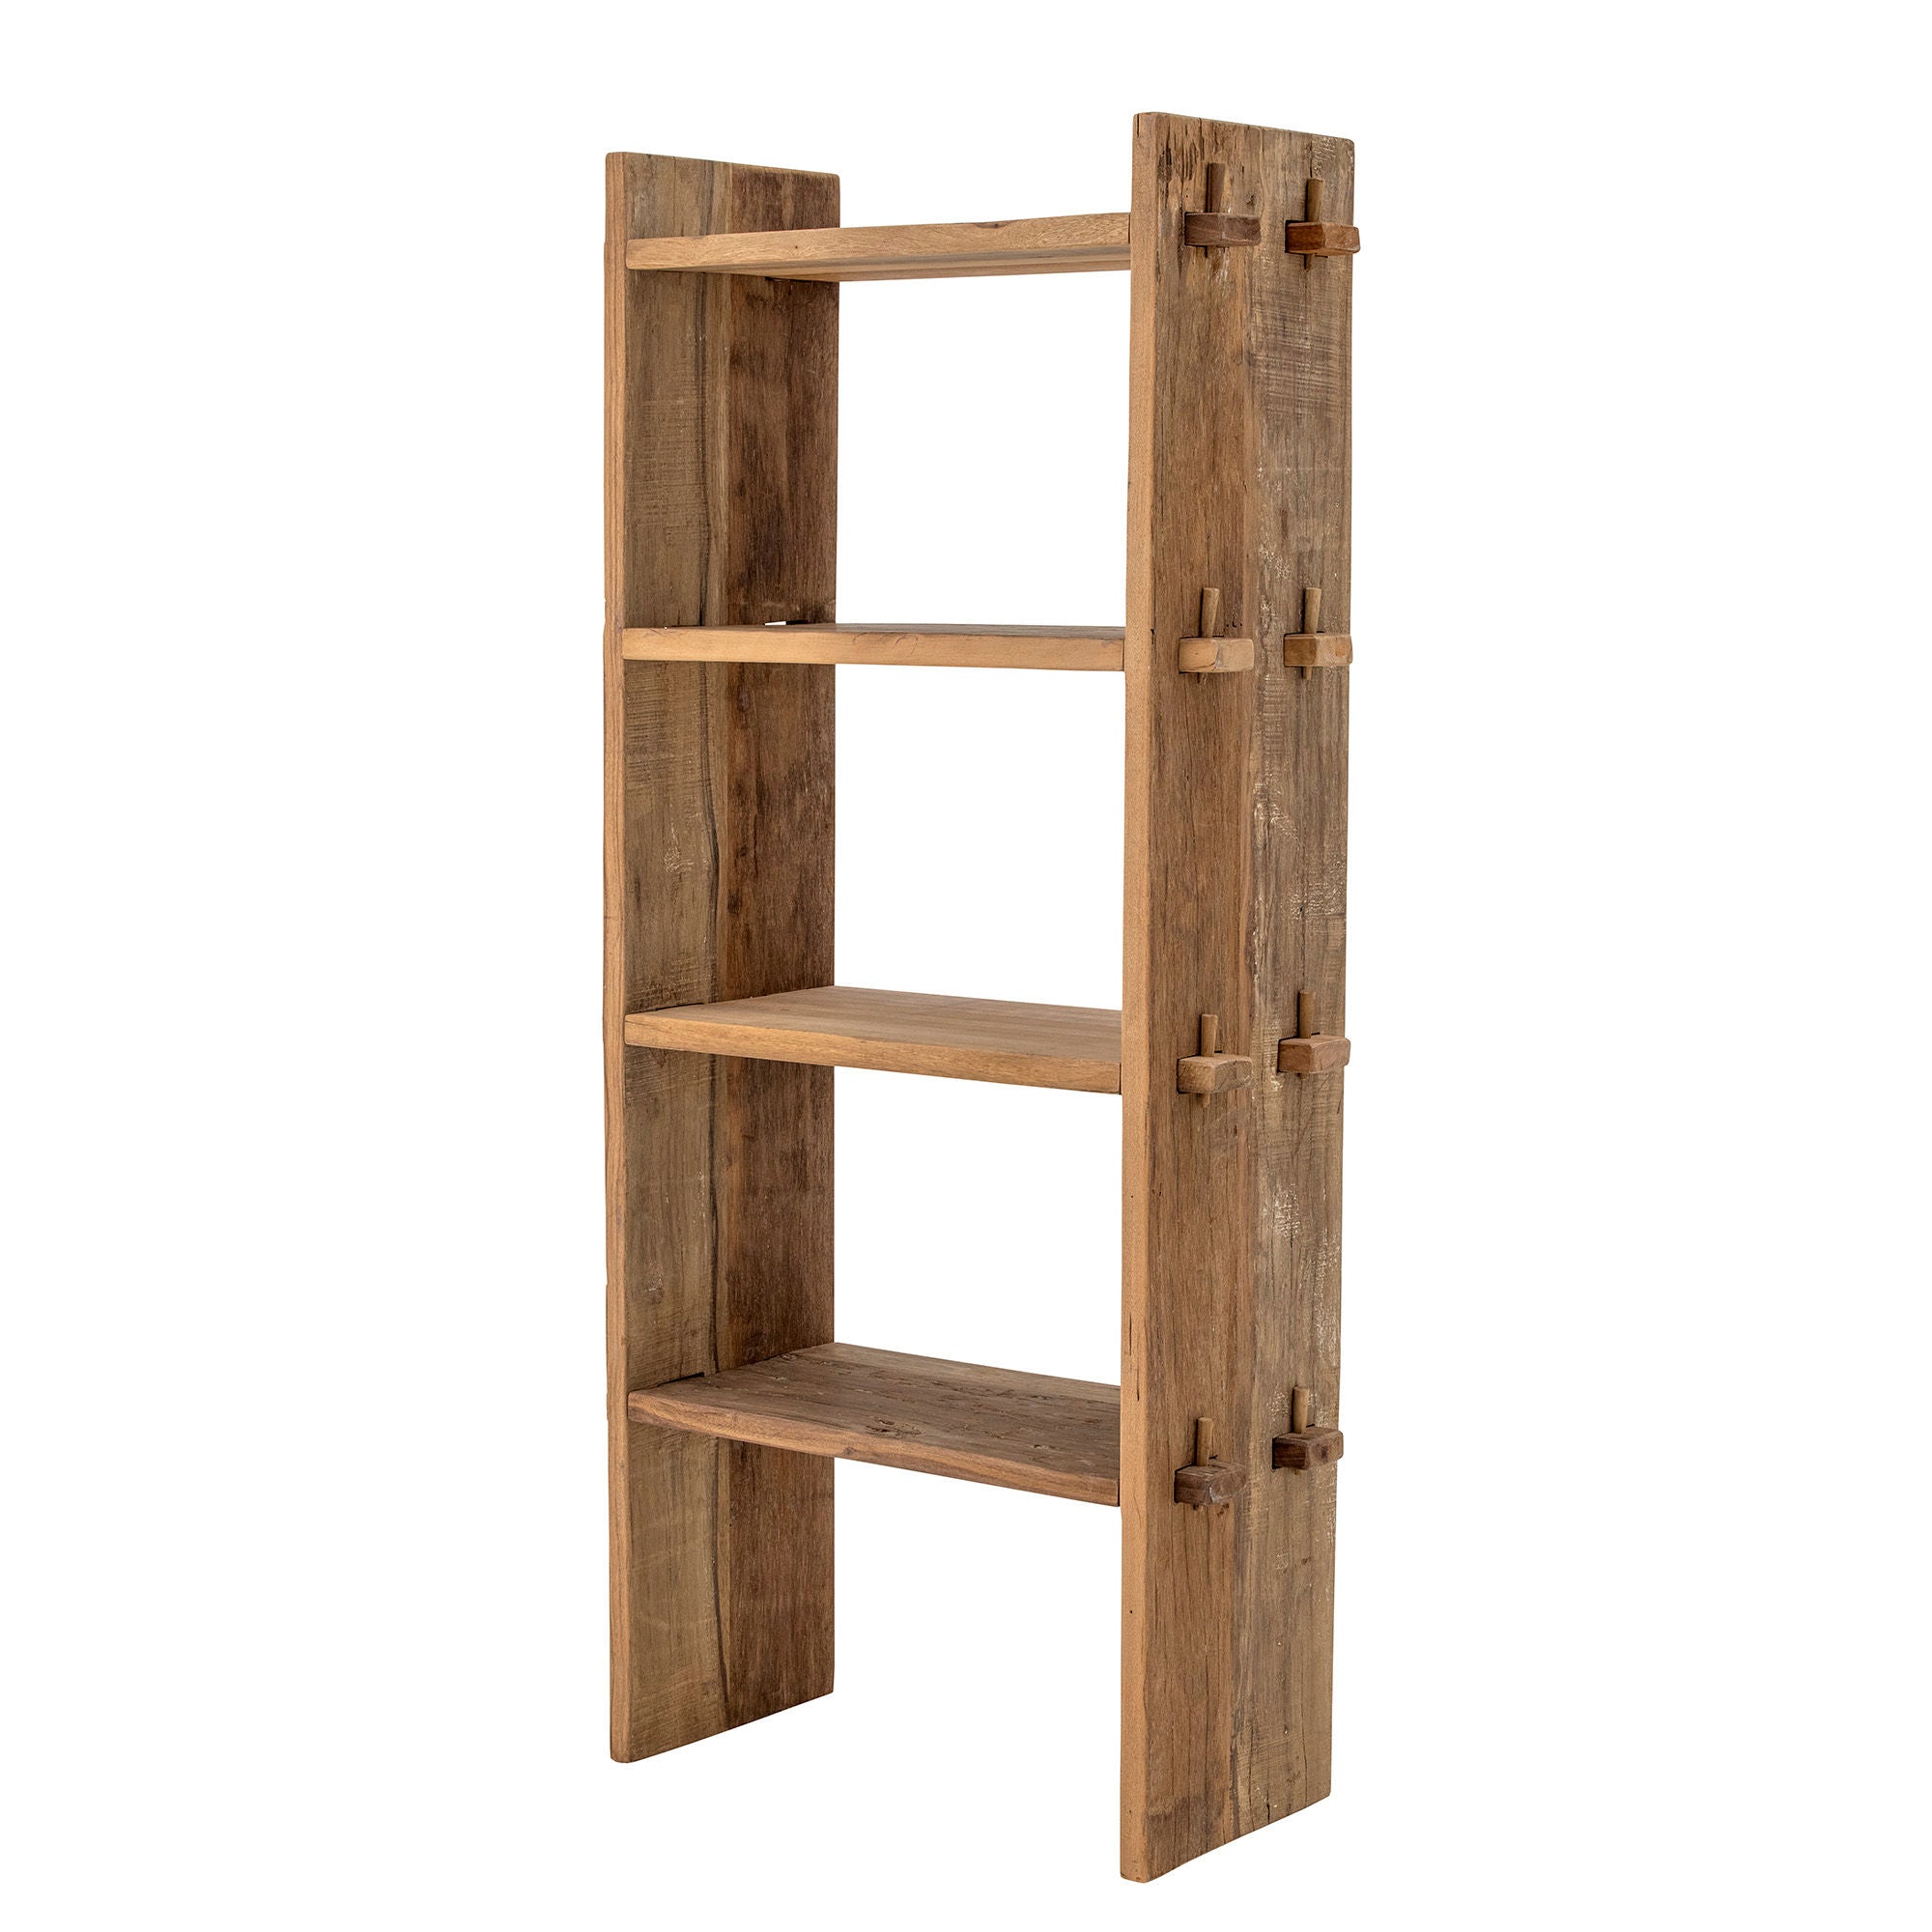 Creative Collection Duke Bookcase, Brown, Reclaimed Wood